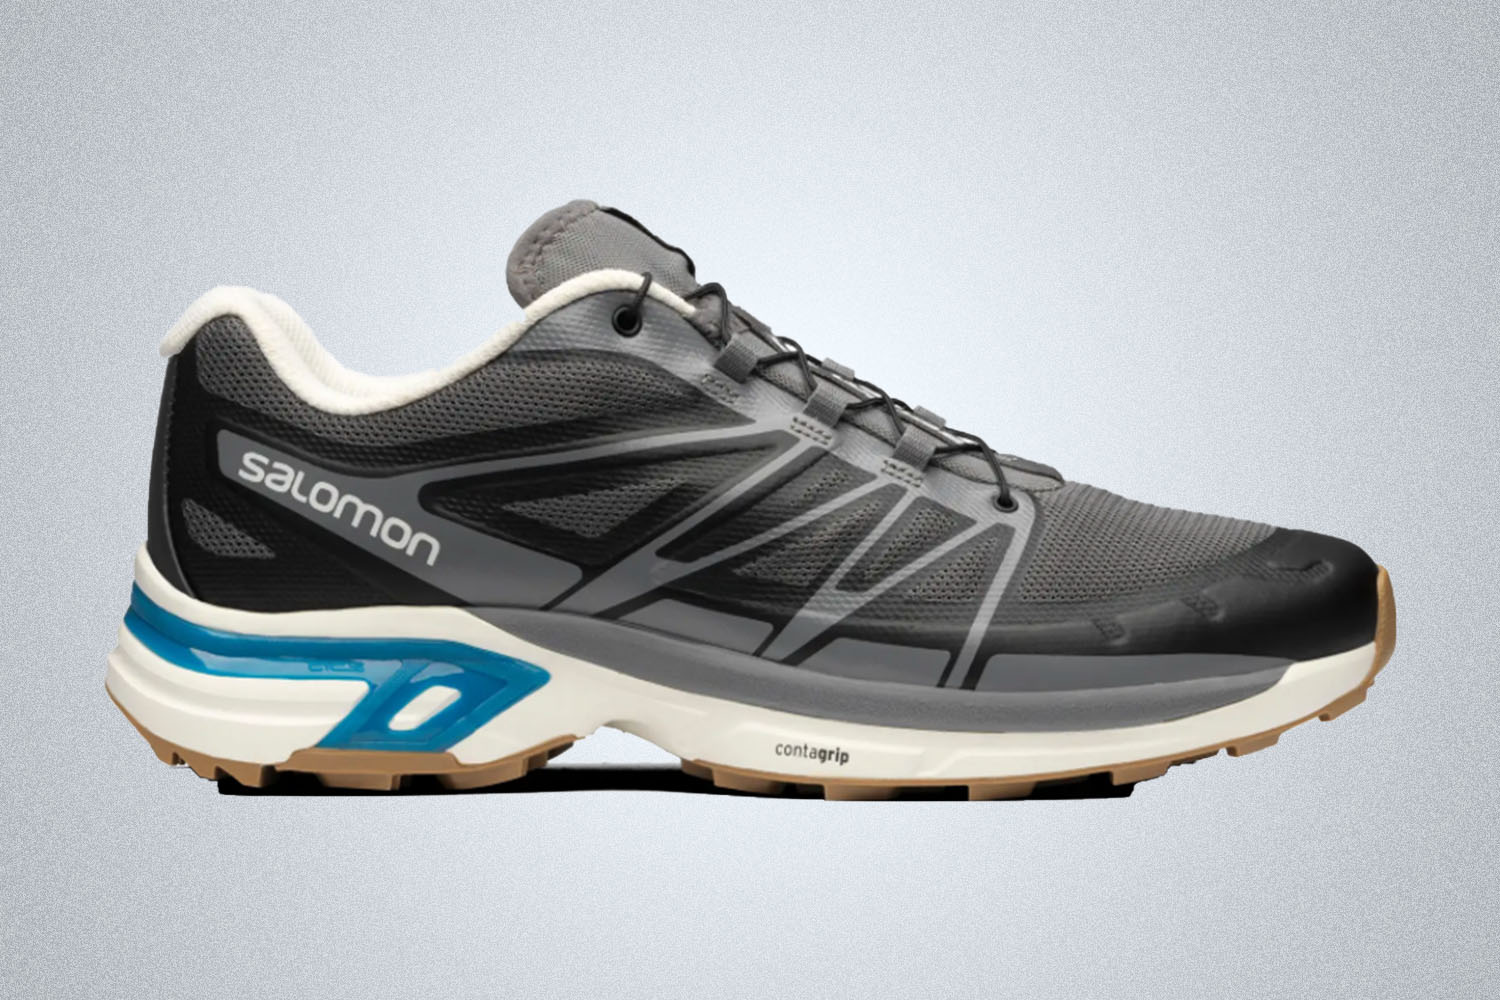 a grey, blue and white Salomon hiking shoe on a grey background